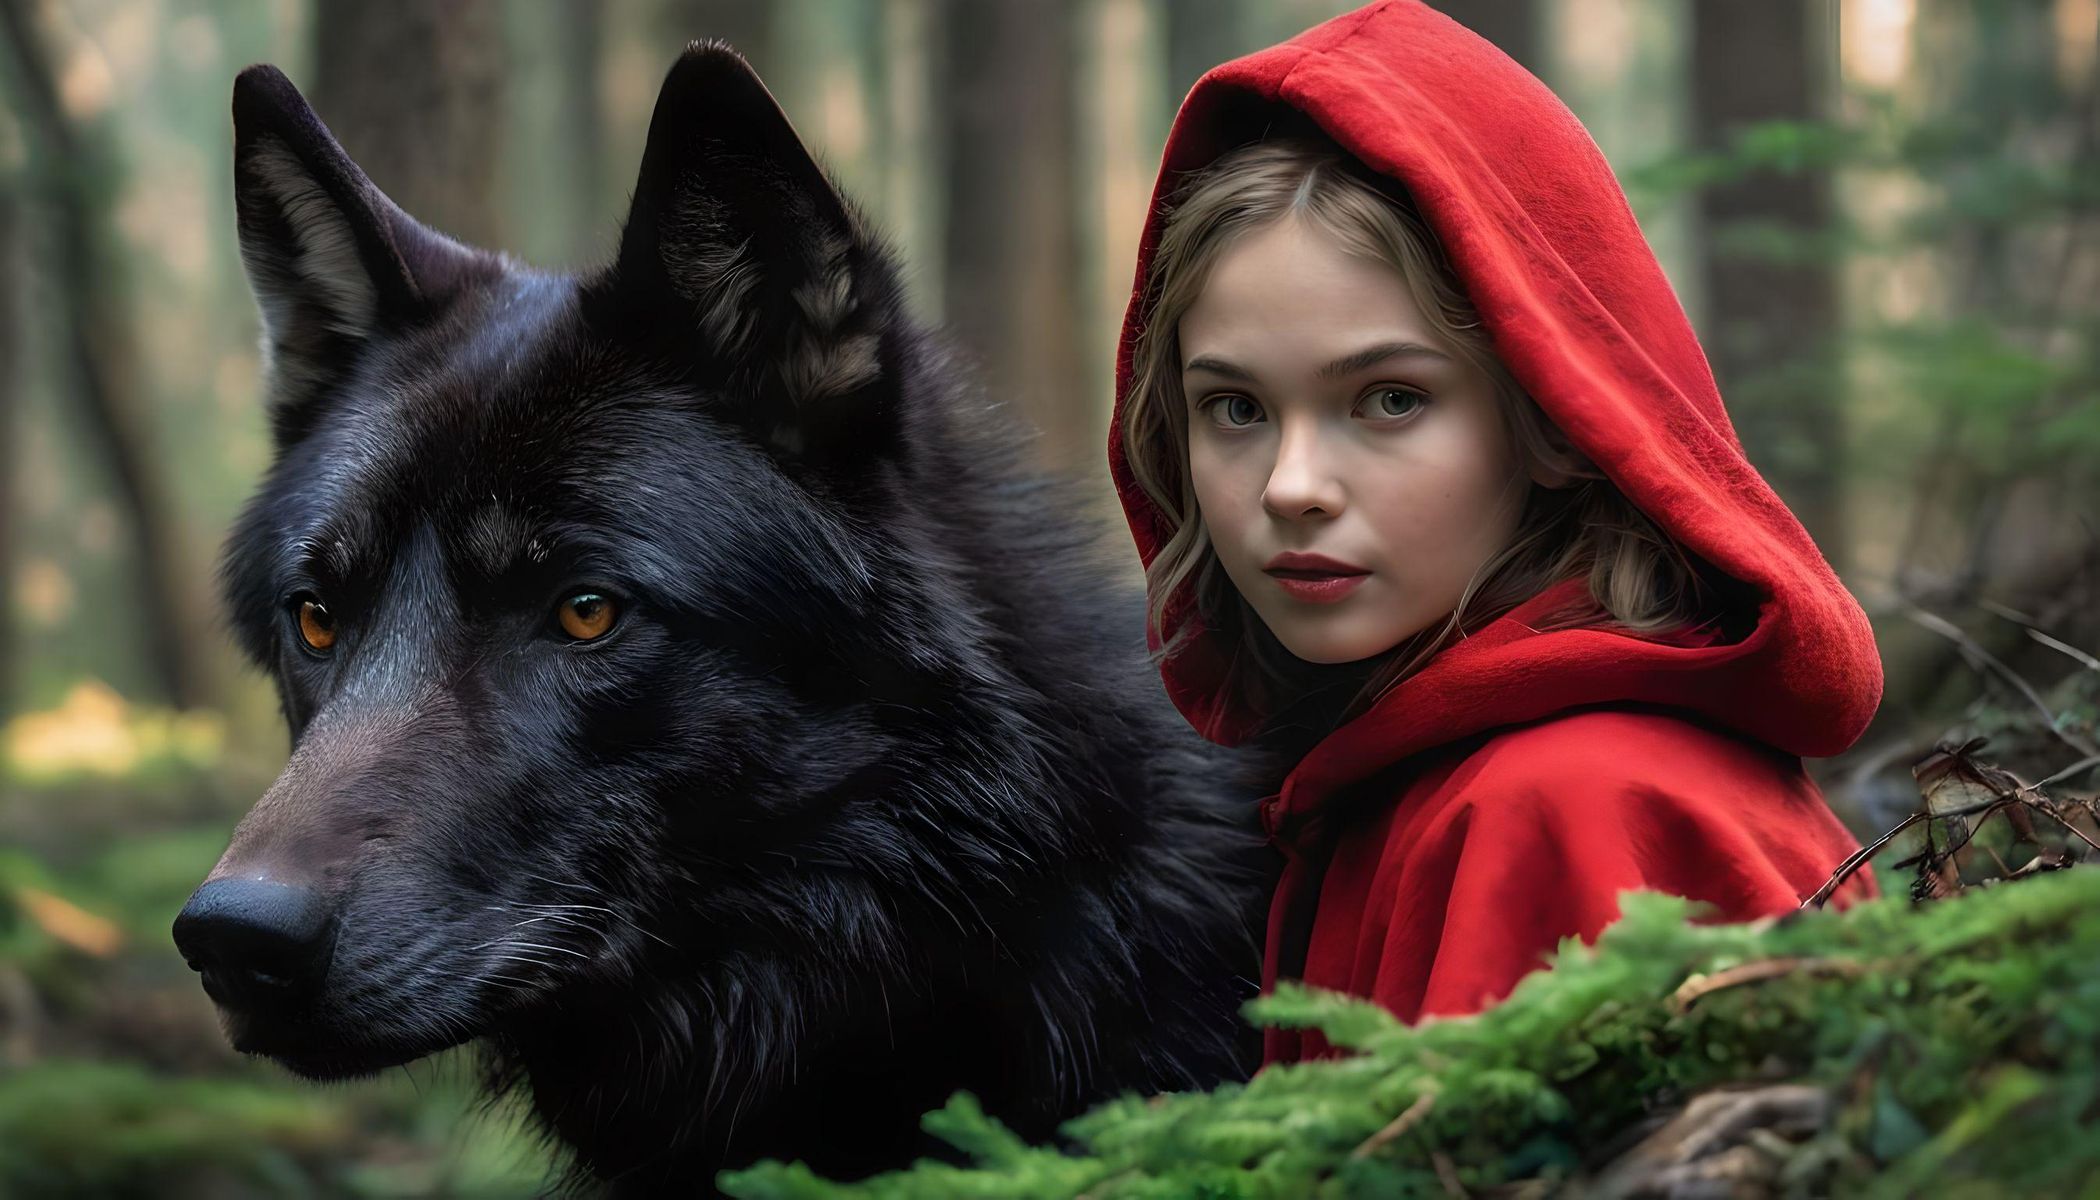 Professional quality portrait, (In an enchanted forest ((the beautiful tiny Red Riding Hood): 1.8) meets ((the black wild-wolf):1.5) for the first time, tension and bewilderment but also discovery and attraction for the beautiful animal. (8K), (HDR +10), image of exceptional quality and detail, balanced and harmonious composition, great depth of field, excellent white color balance, vivid colours, complex and intricate details.